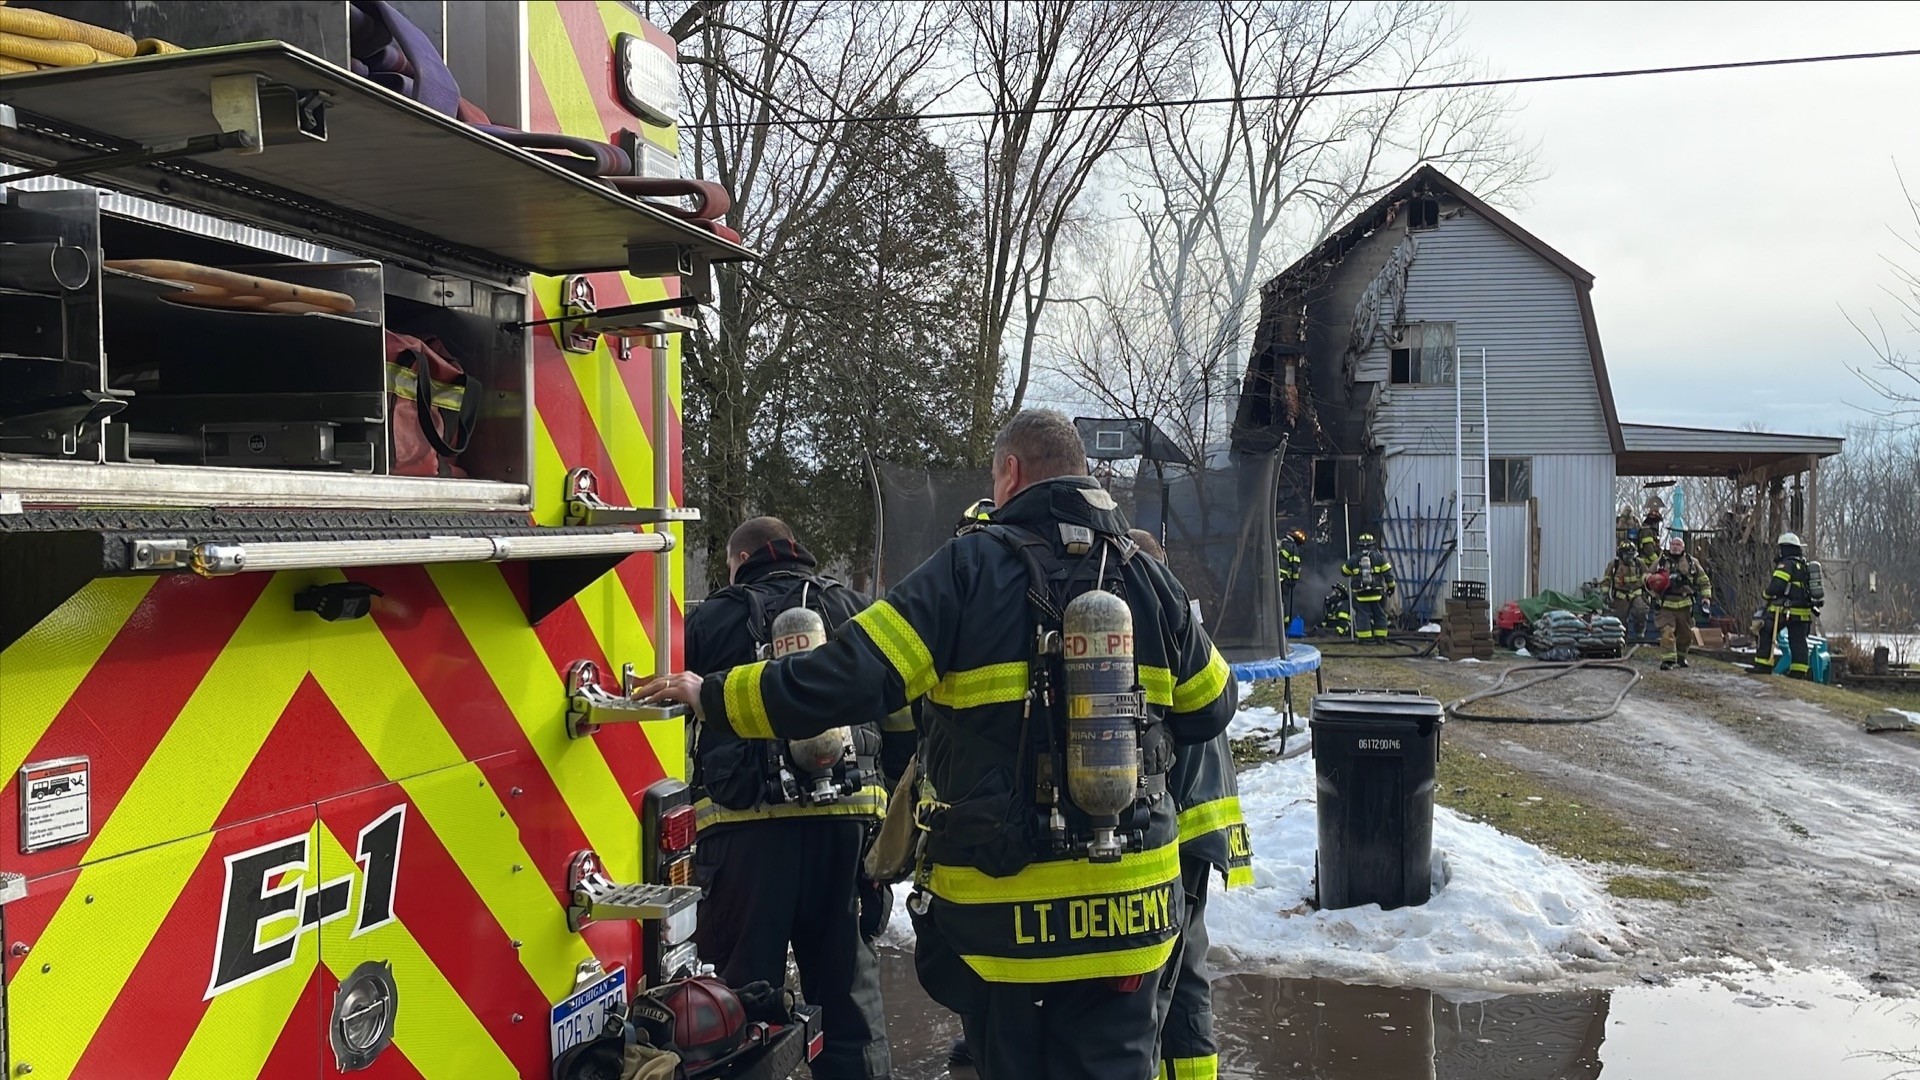 The Plainfield Township Fire Department says the fire started just before 10 a.m. at a home off West River Drive on Abrigador Trail.